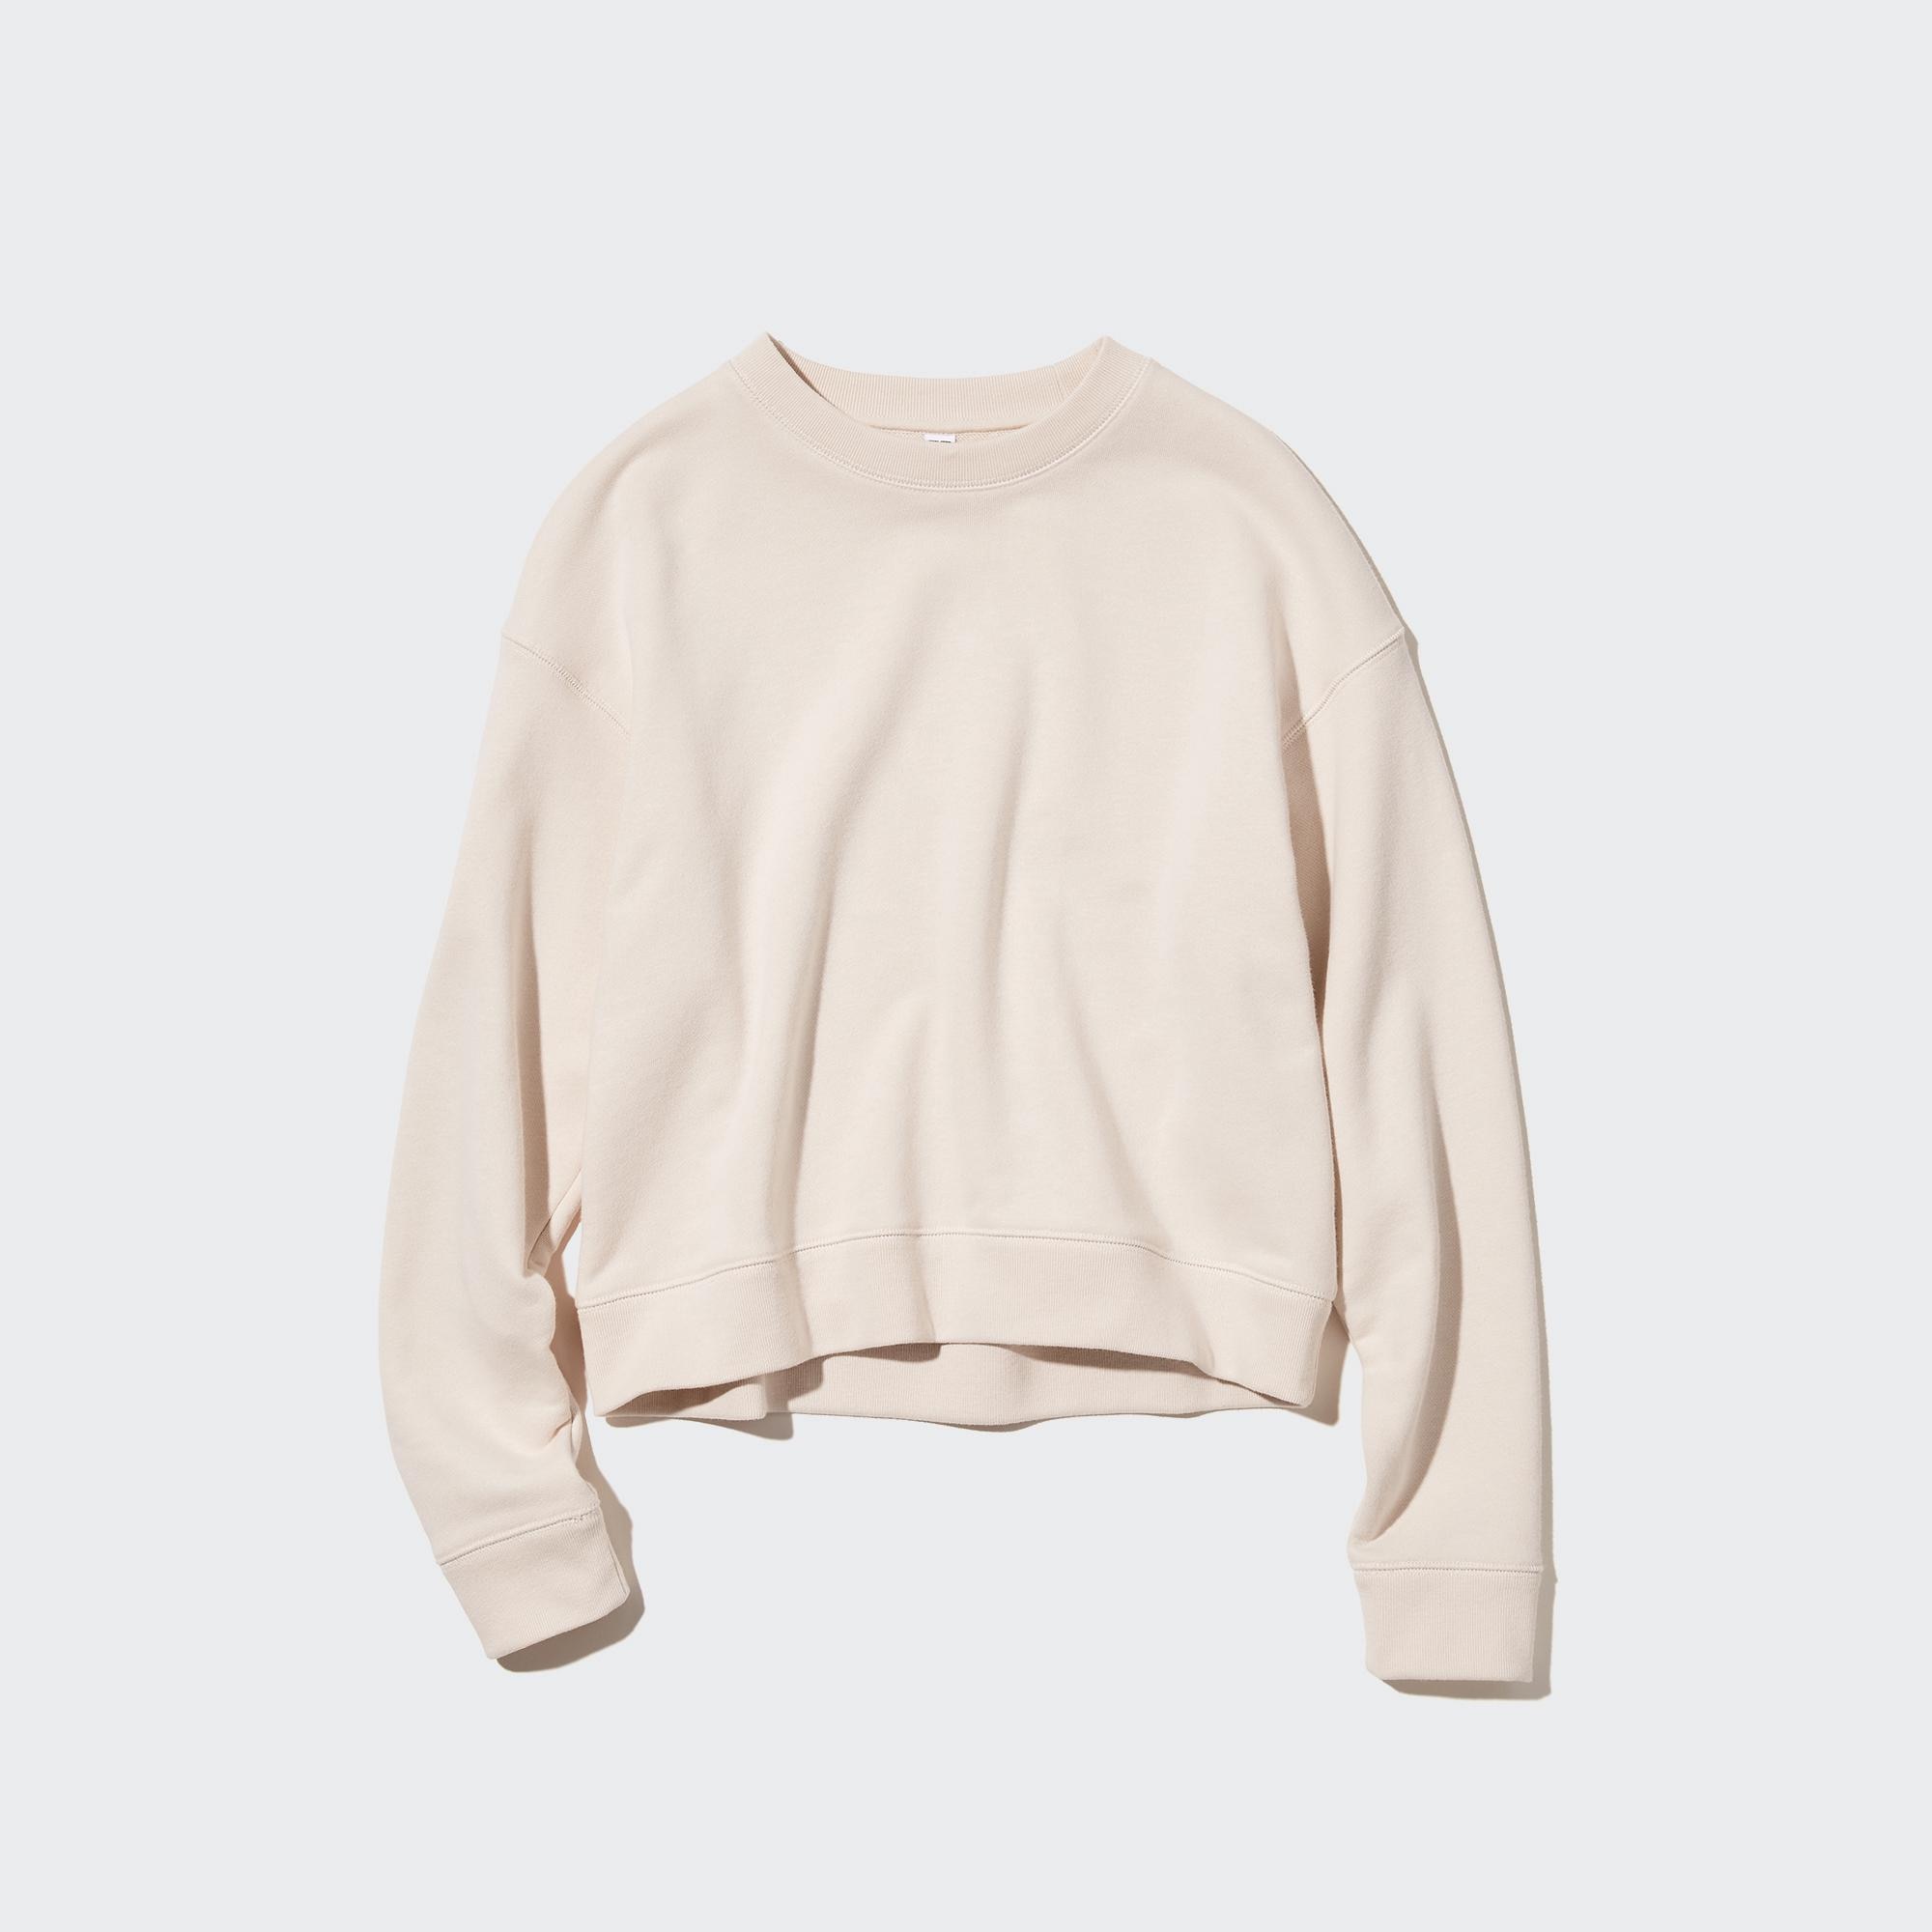 Check styling ideas for「Crew Neck Cropped Long-Sleeve Sweatshirt